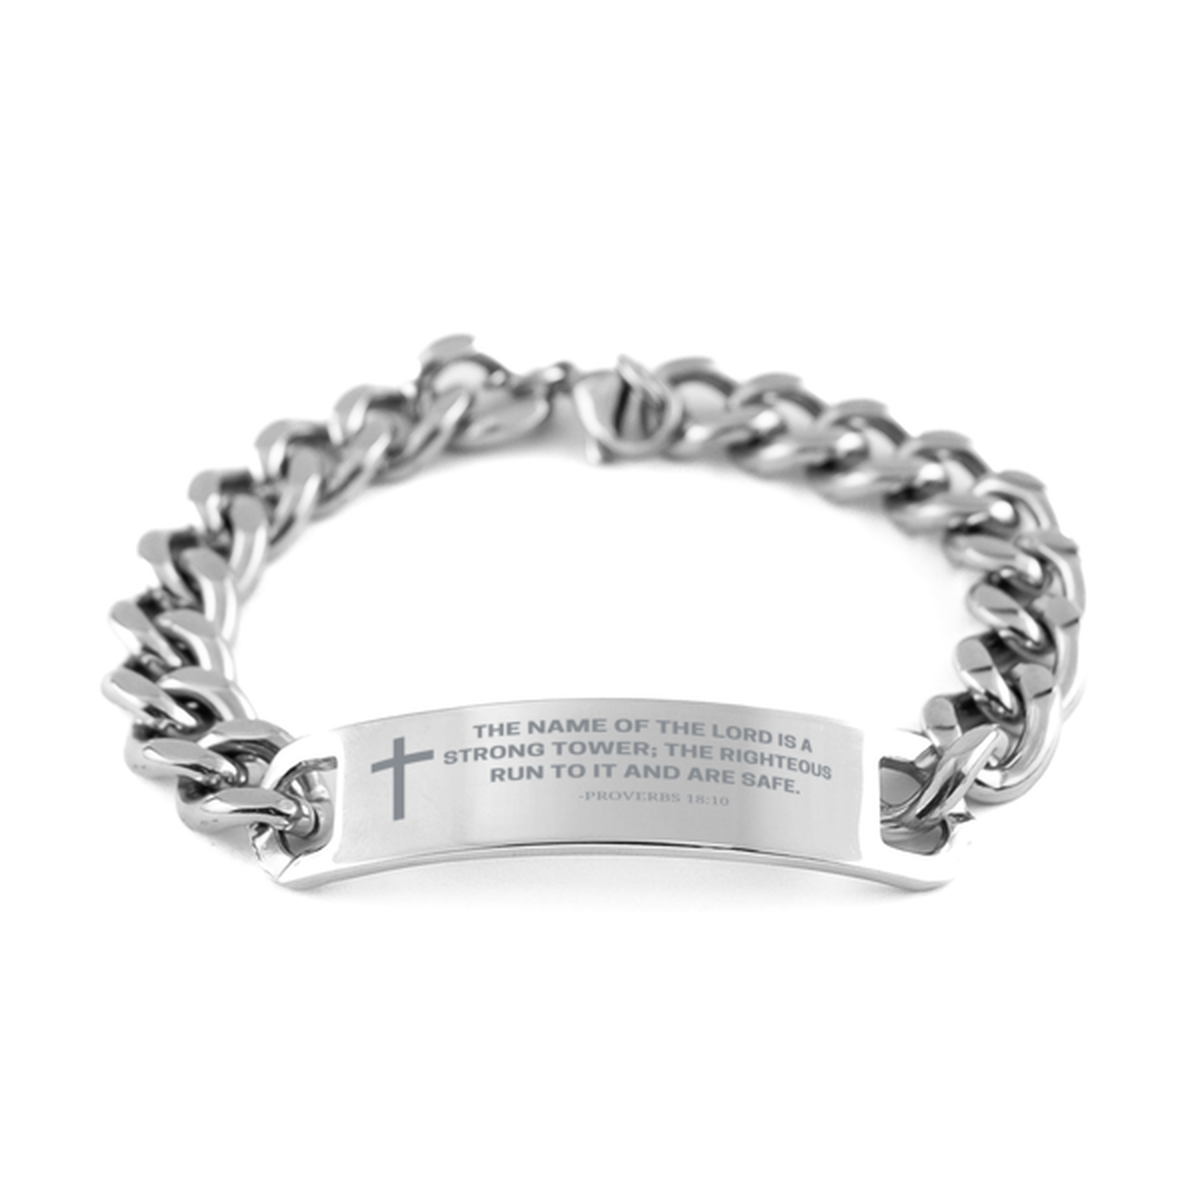 Baptism Gifts For Teenage Boys Girls, Christian Bible Verse Cuban Chain Bracelet, The name of the Lord is a strong, Catholic Confirmation Gifts for Son, Godson, Grandson, Nephew